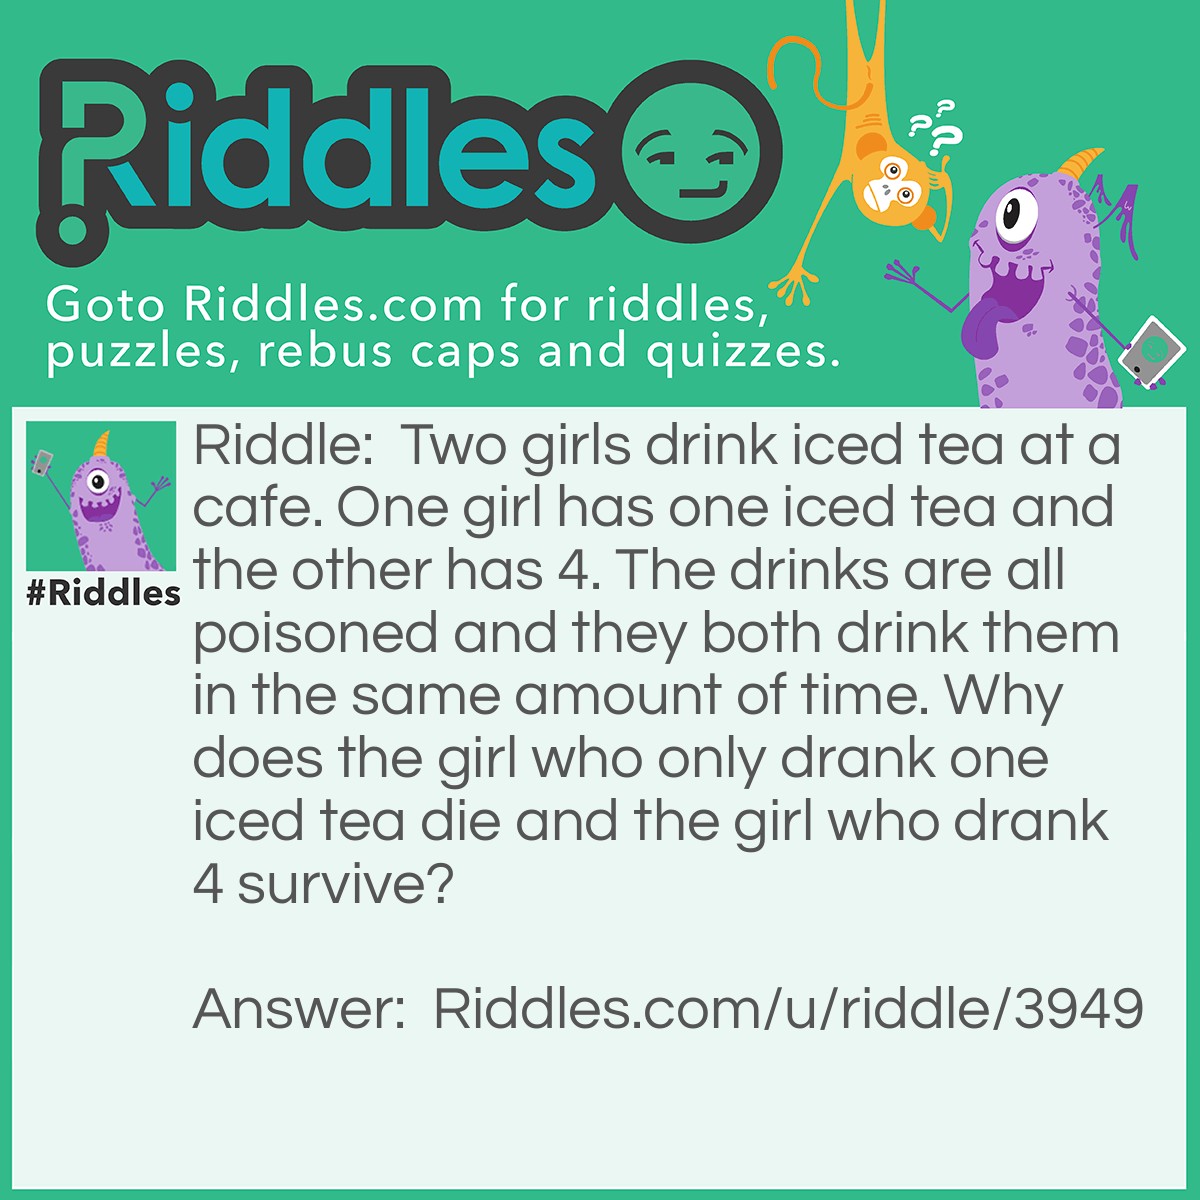 Riddle: Two girls drink iced tea at a cafe. One girl has one iced tea and the other has 4. The drinks are all poisoned and they both drink them in the same amount of time. Why does the girl who only drank one iced tea die and the girl who drank 4 survive? Answer: The ice is poisoned and it didn't have time to melt for the girl who drank 4.